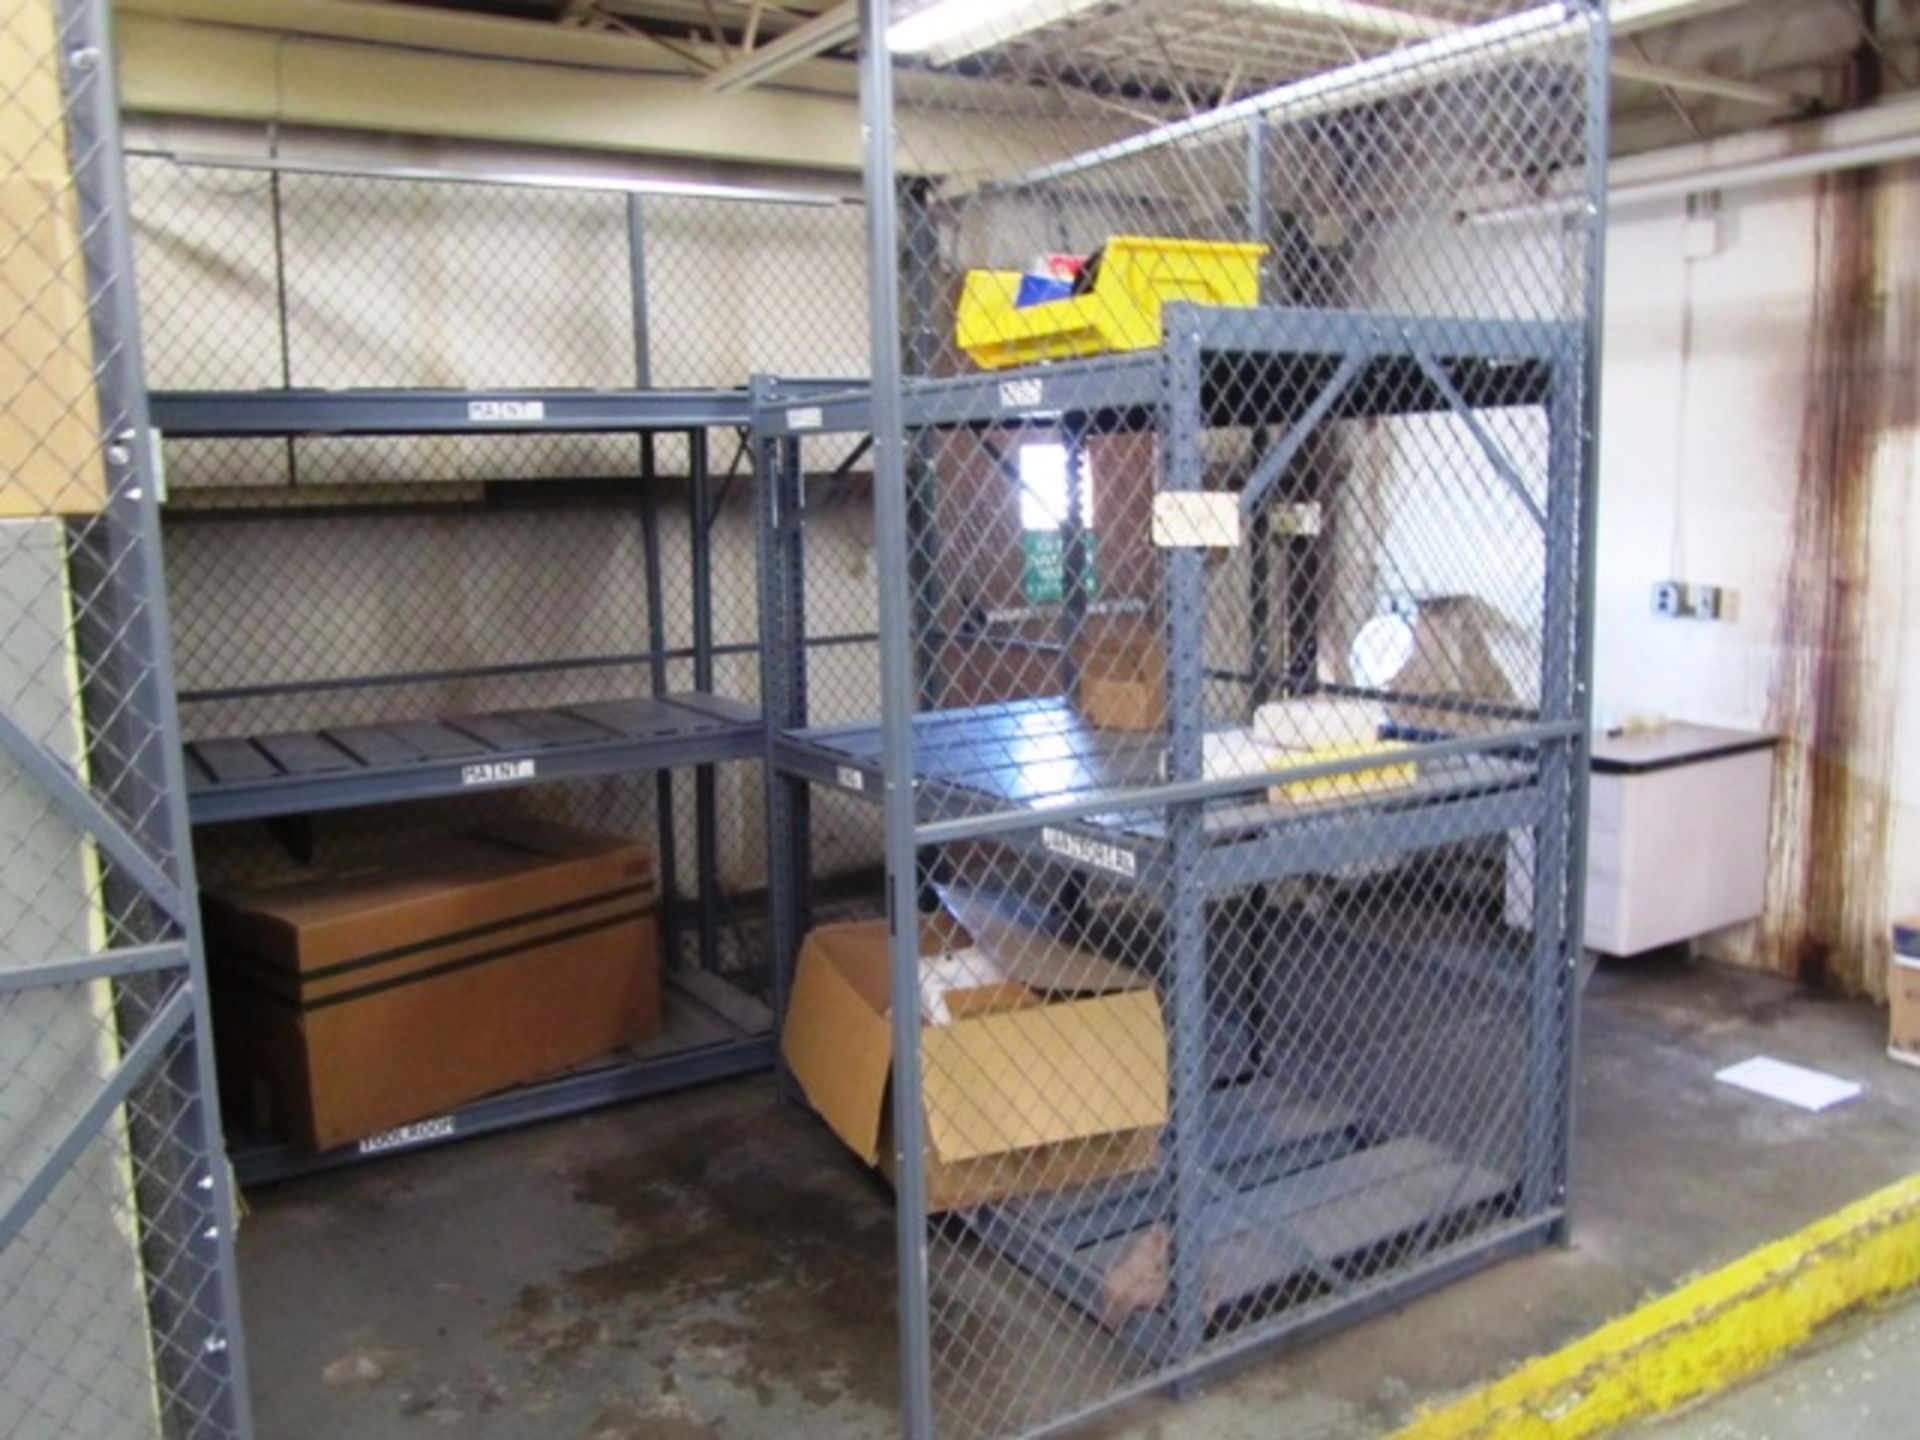 2 Sections of Racking (in cage)